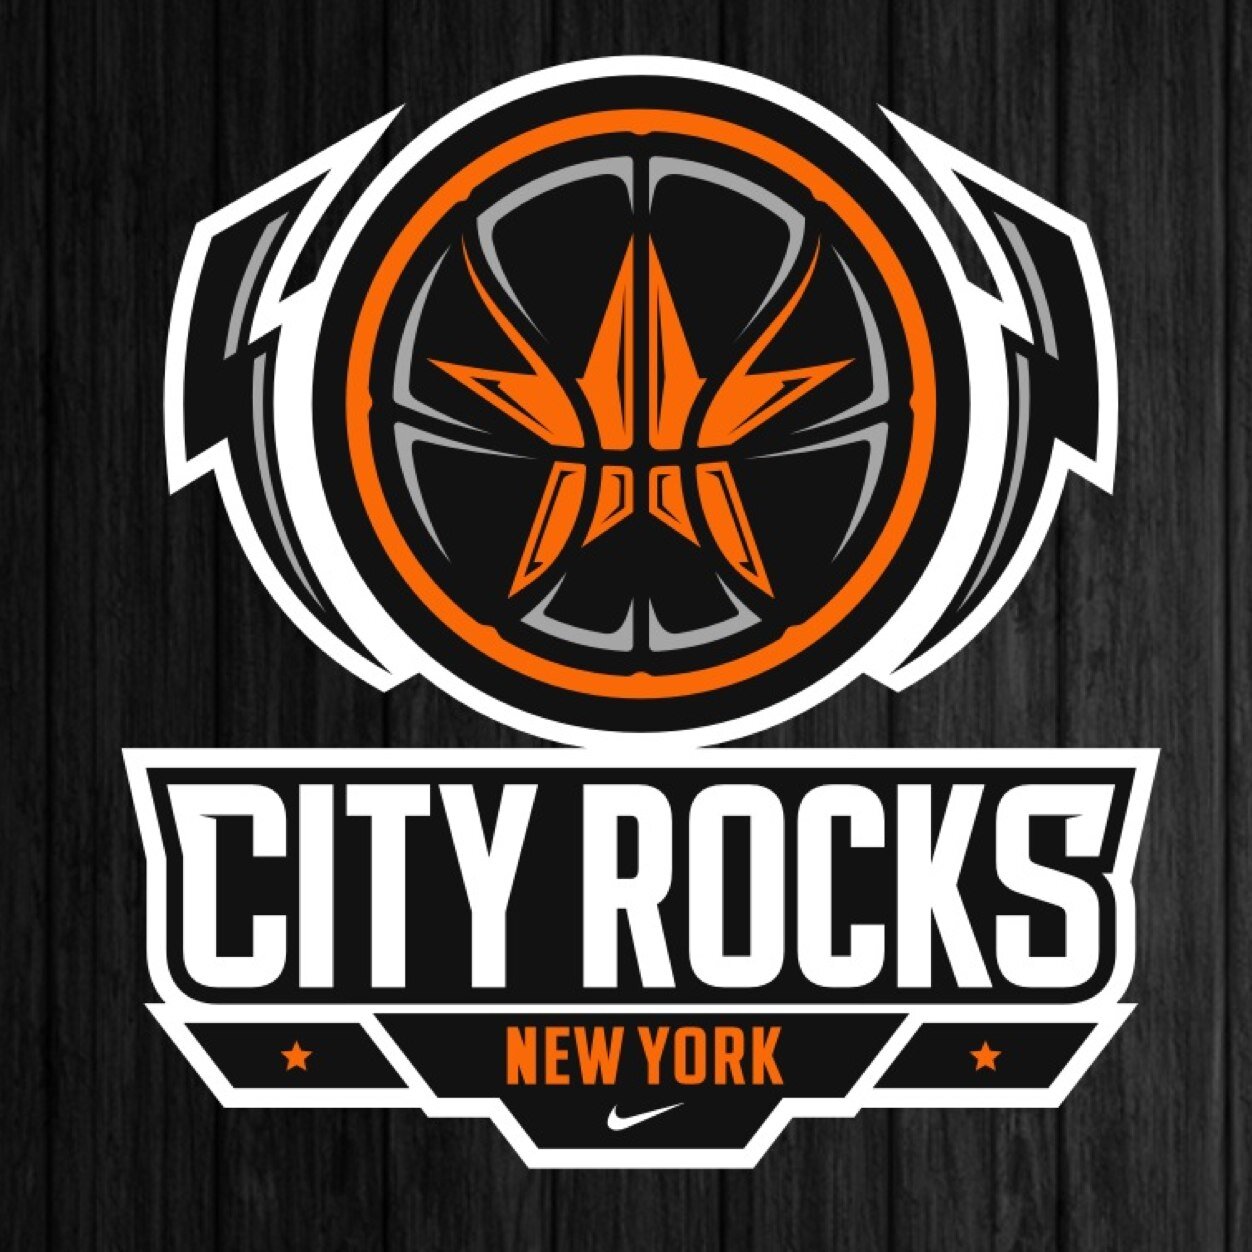 Official Twitter account of the CITY ROCKS - EYBL member since inception.